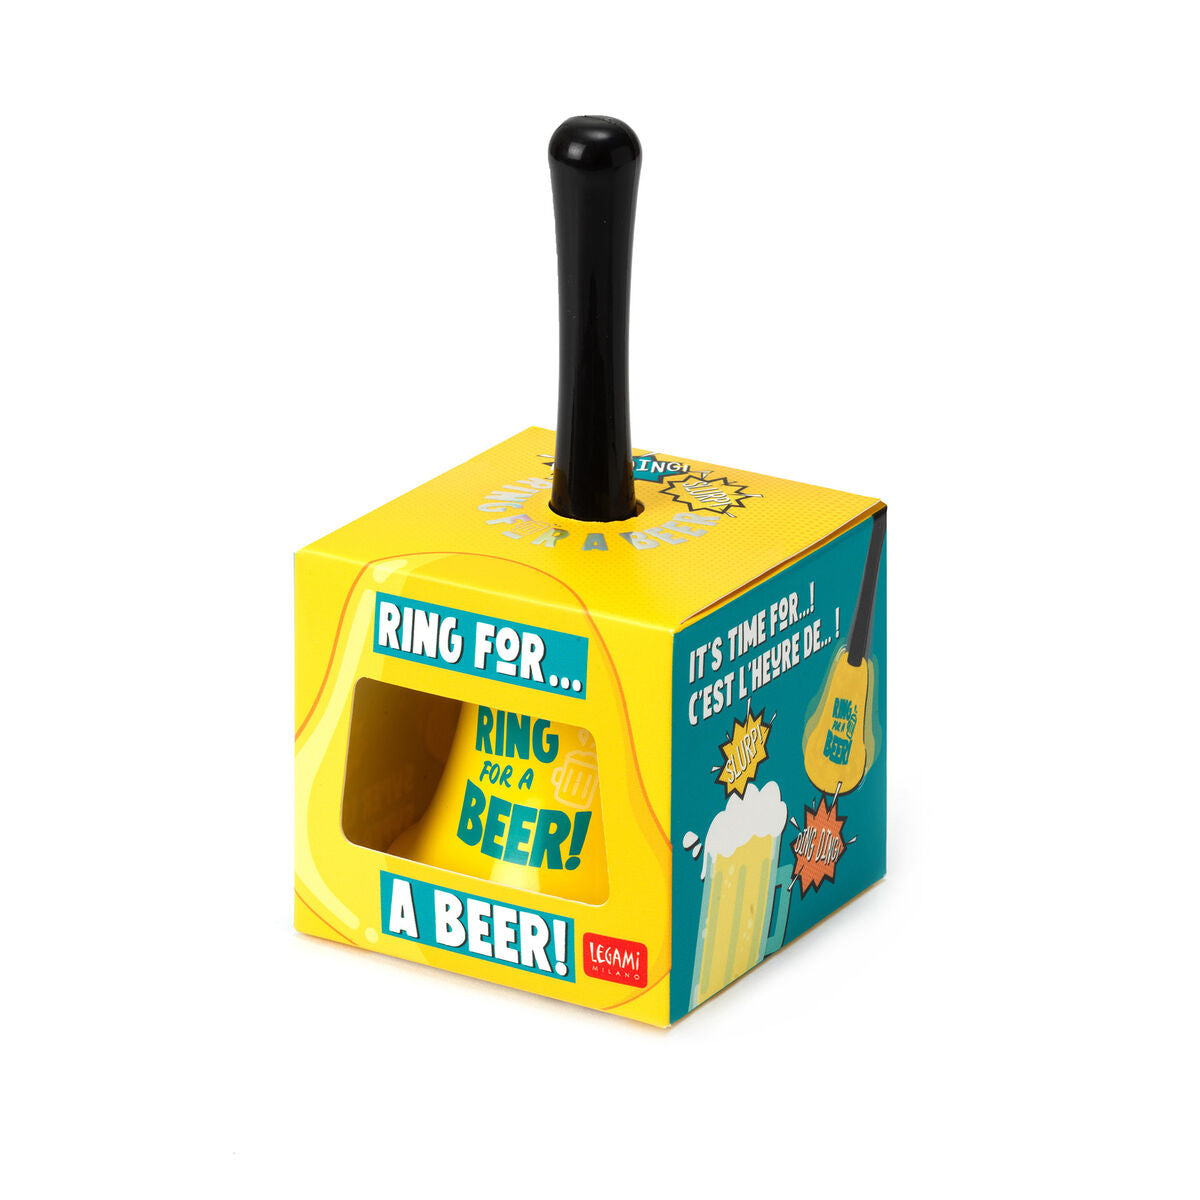 Fab Gifts | Legami Ring For… Beer by Weirs of Baggot Street